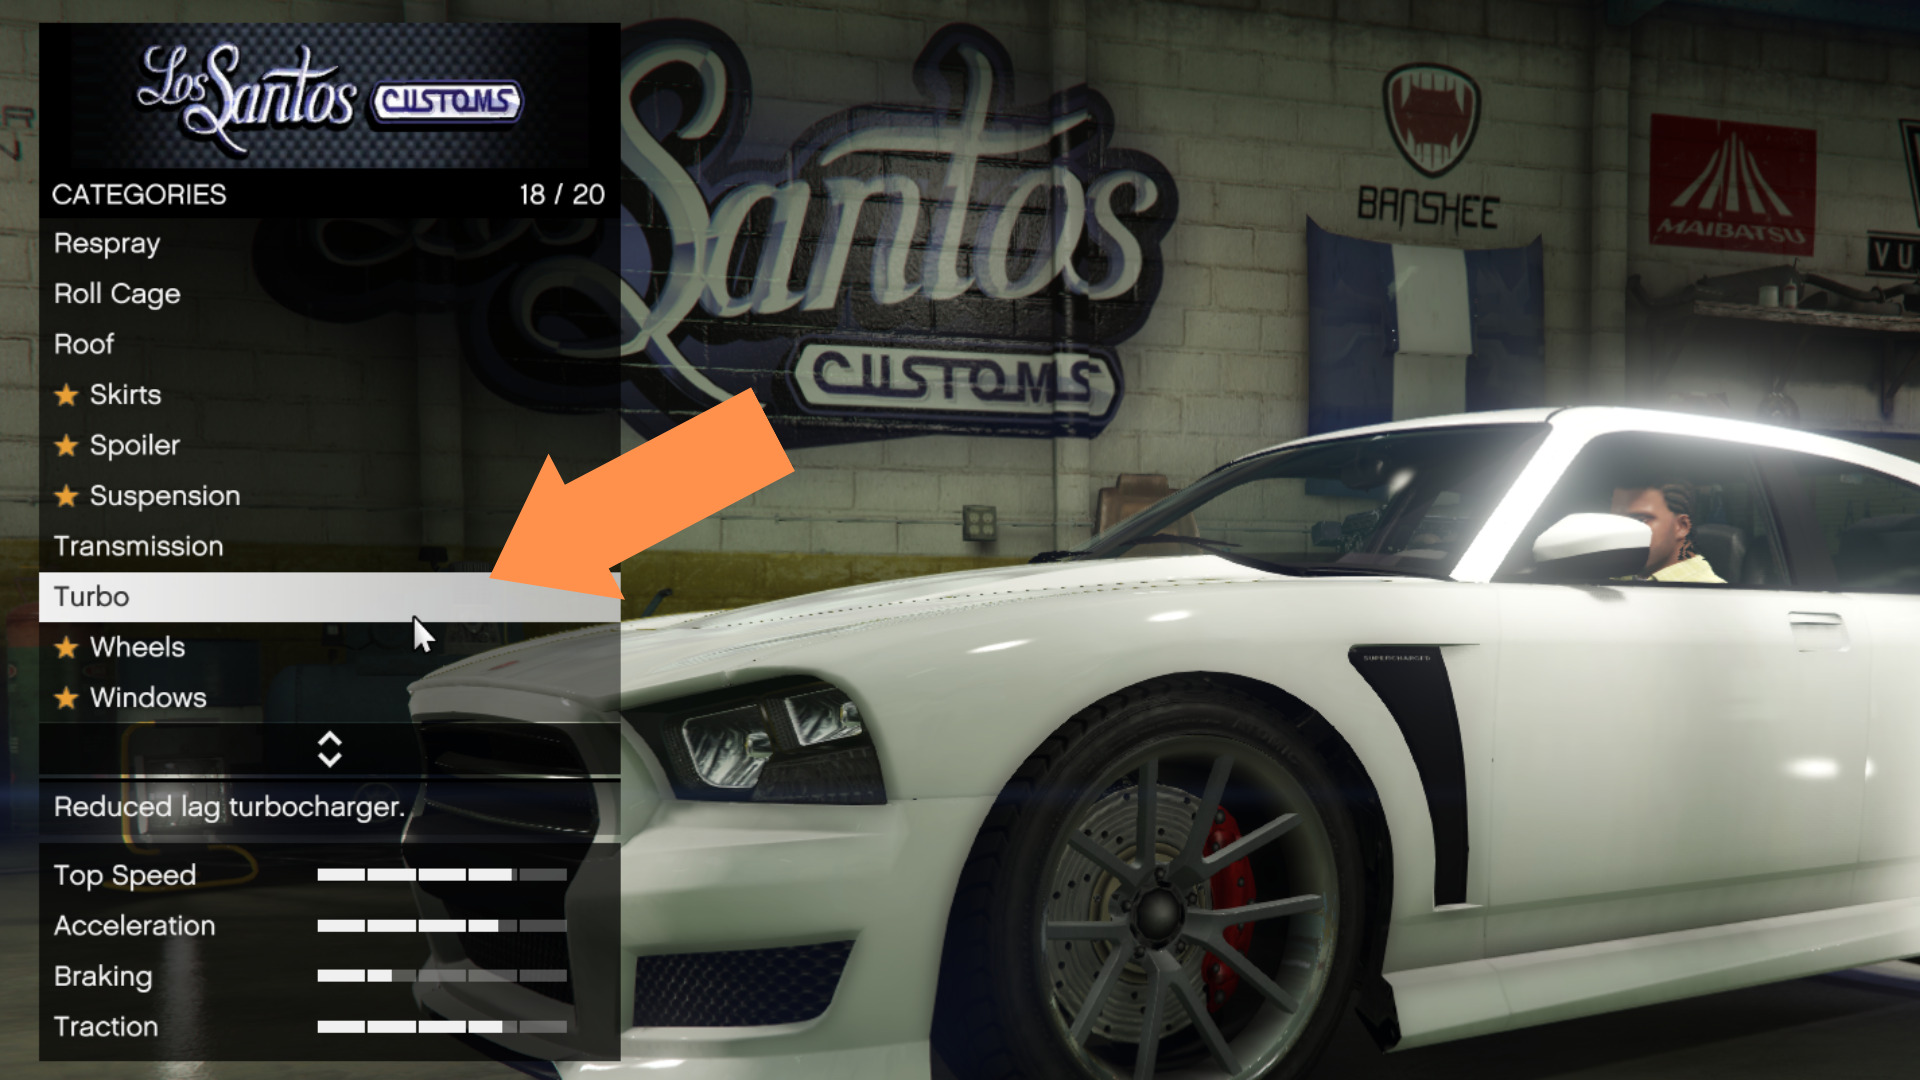 Head to Los Santos Customs in GTA V and look for the Turbo option.